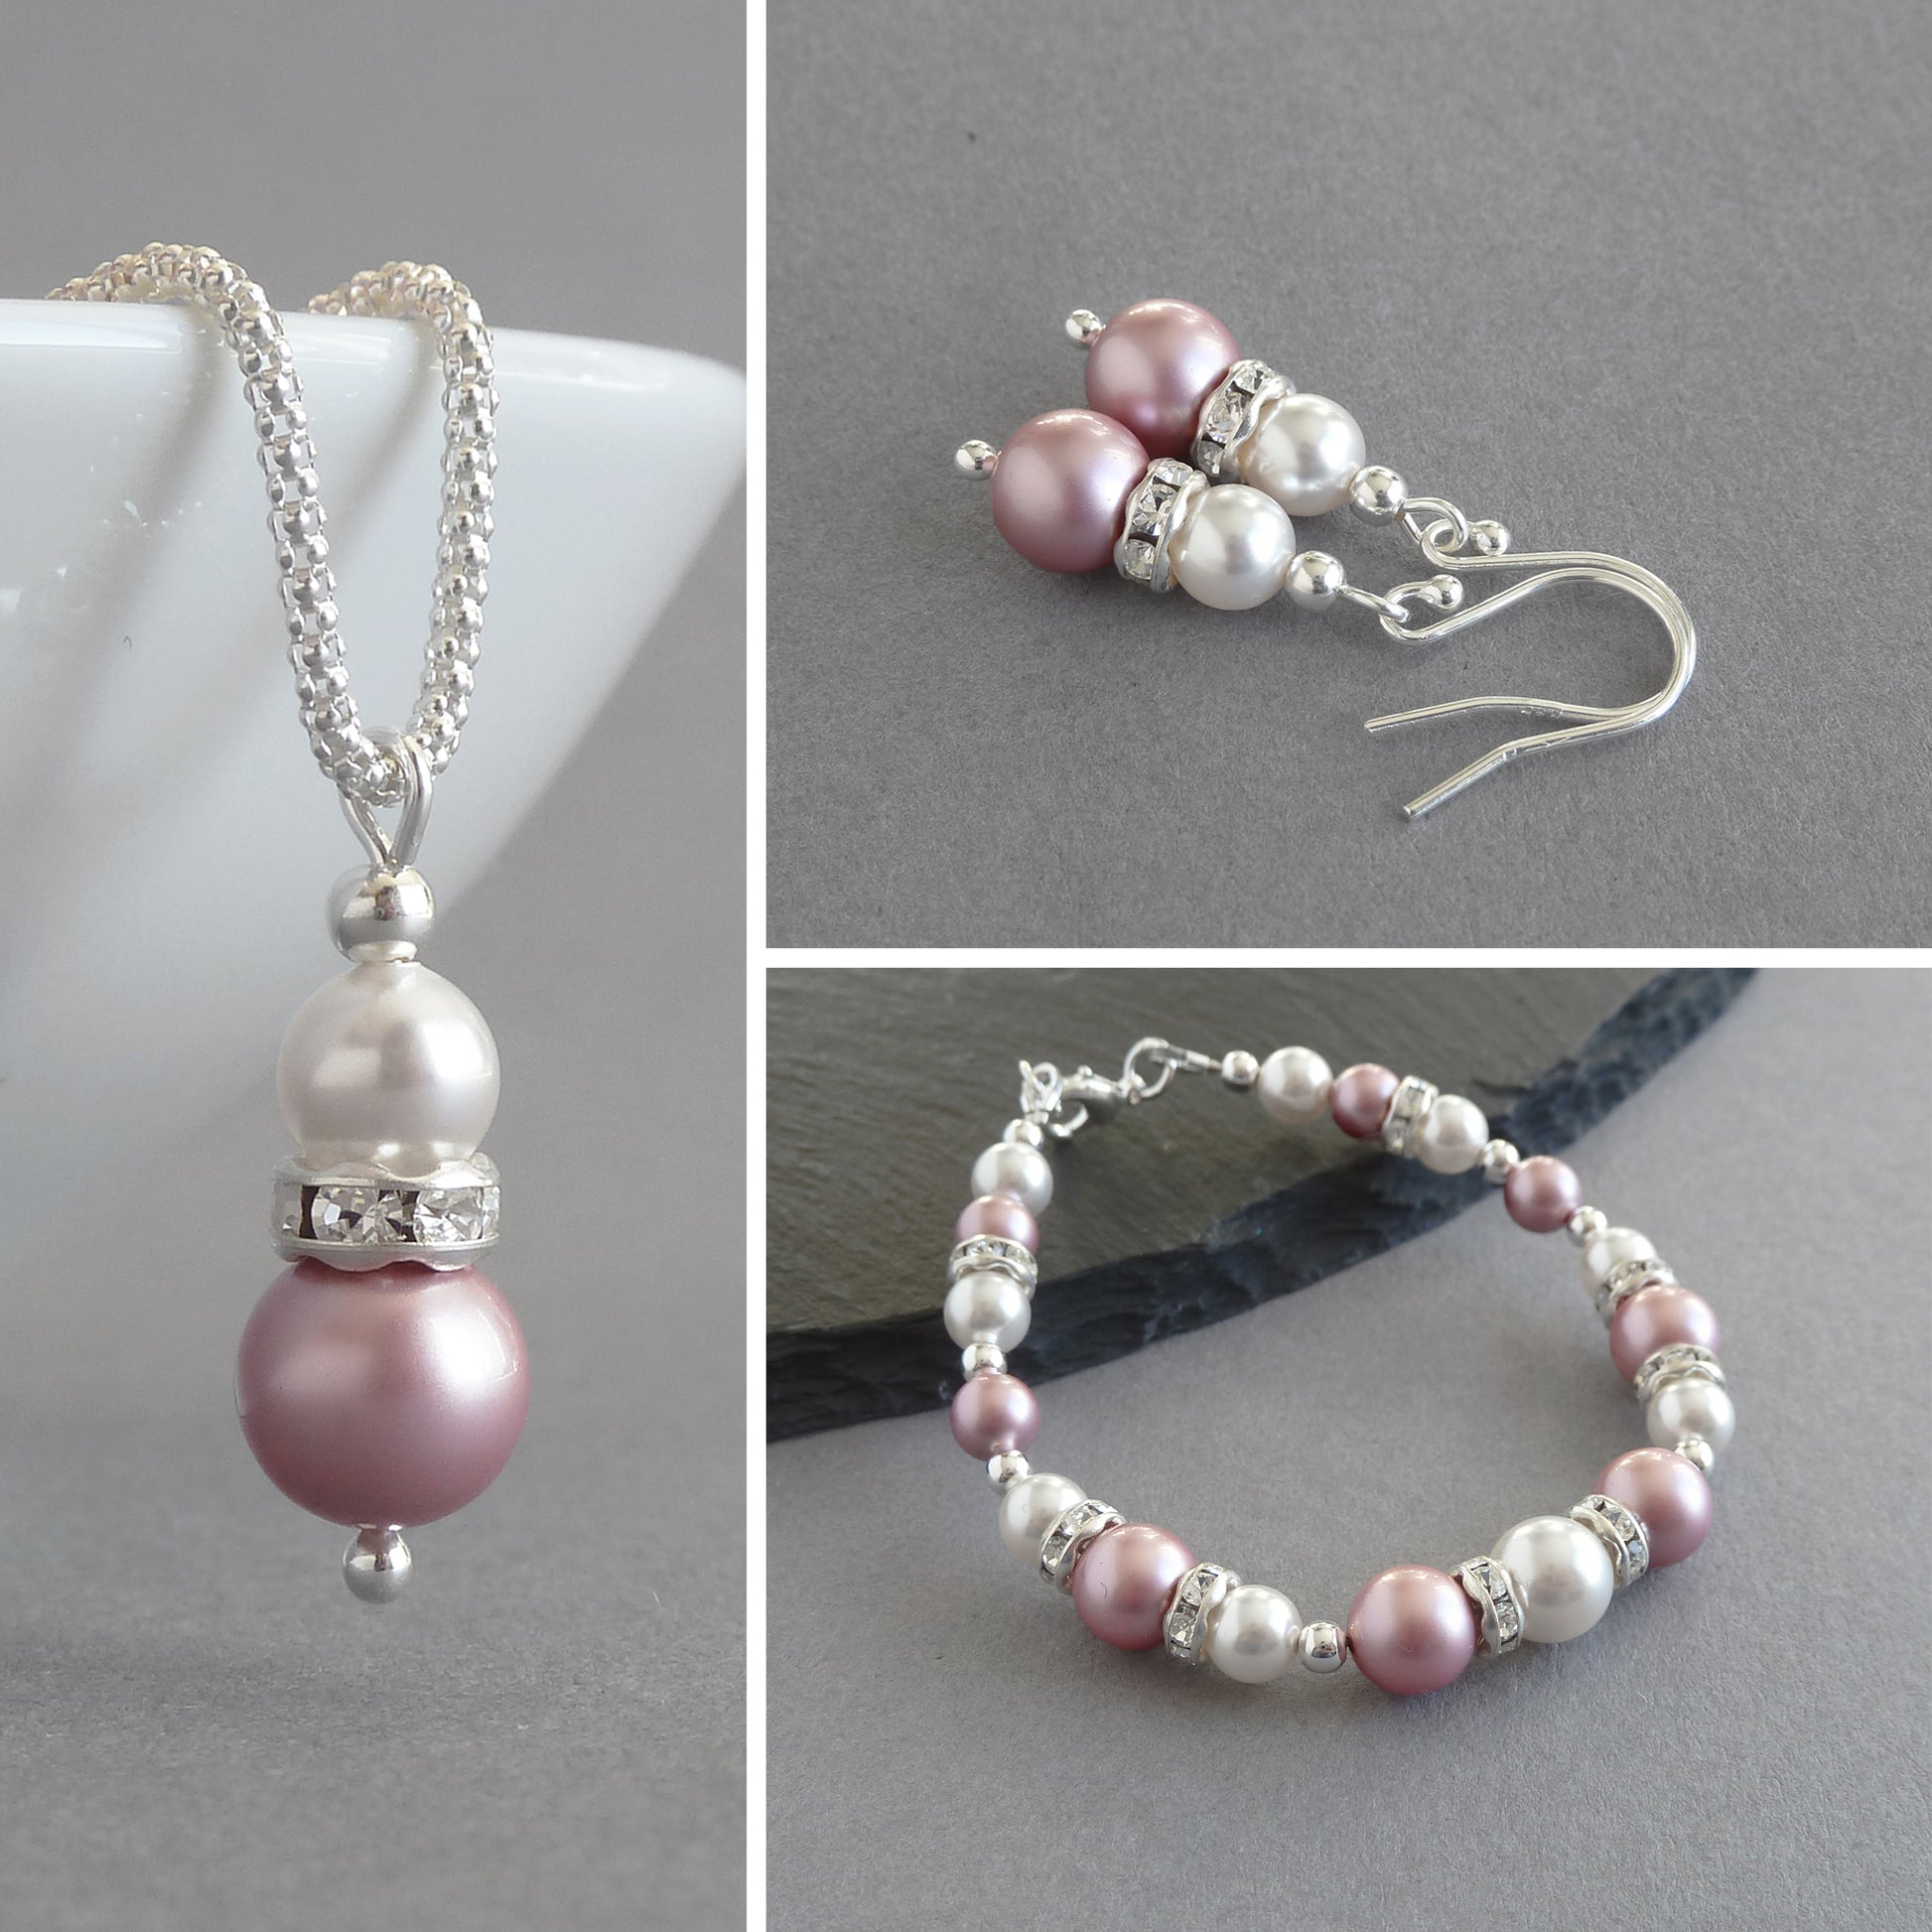 Dusky pink pearl and crystal jewellery set by Anna King